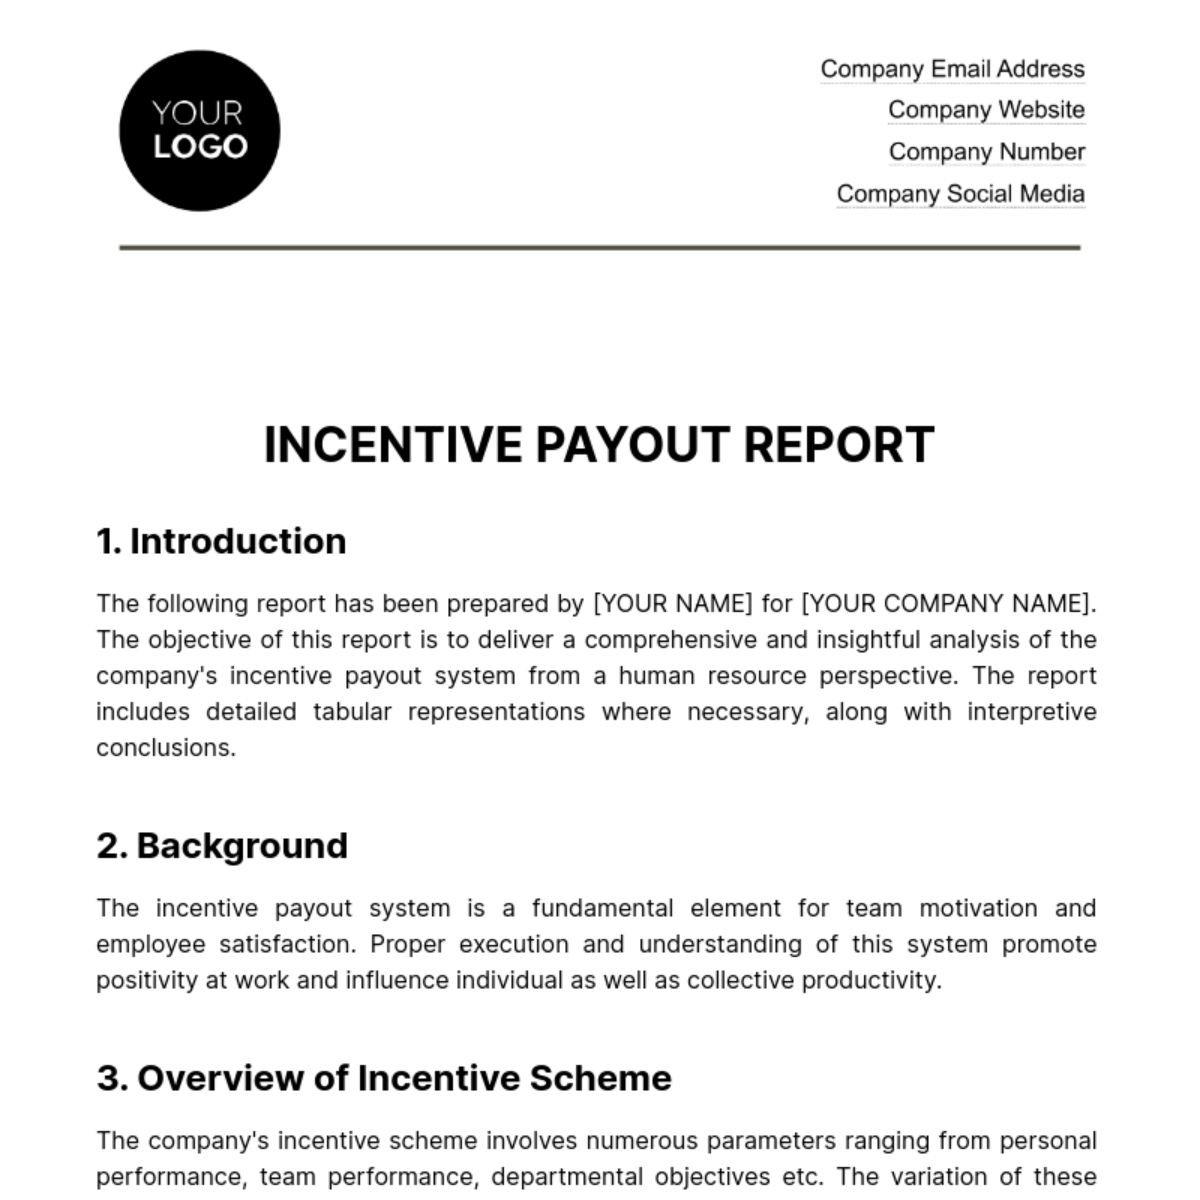 Free Incentive Payout Report HR Template